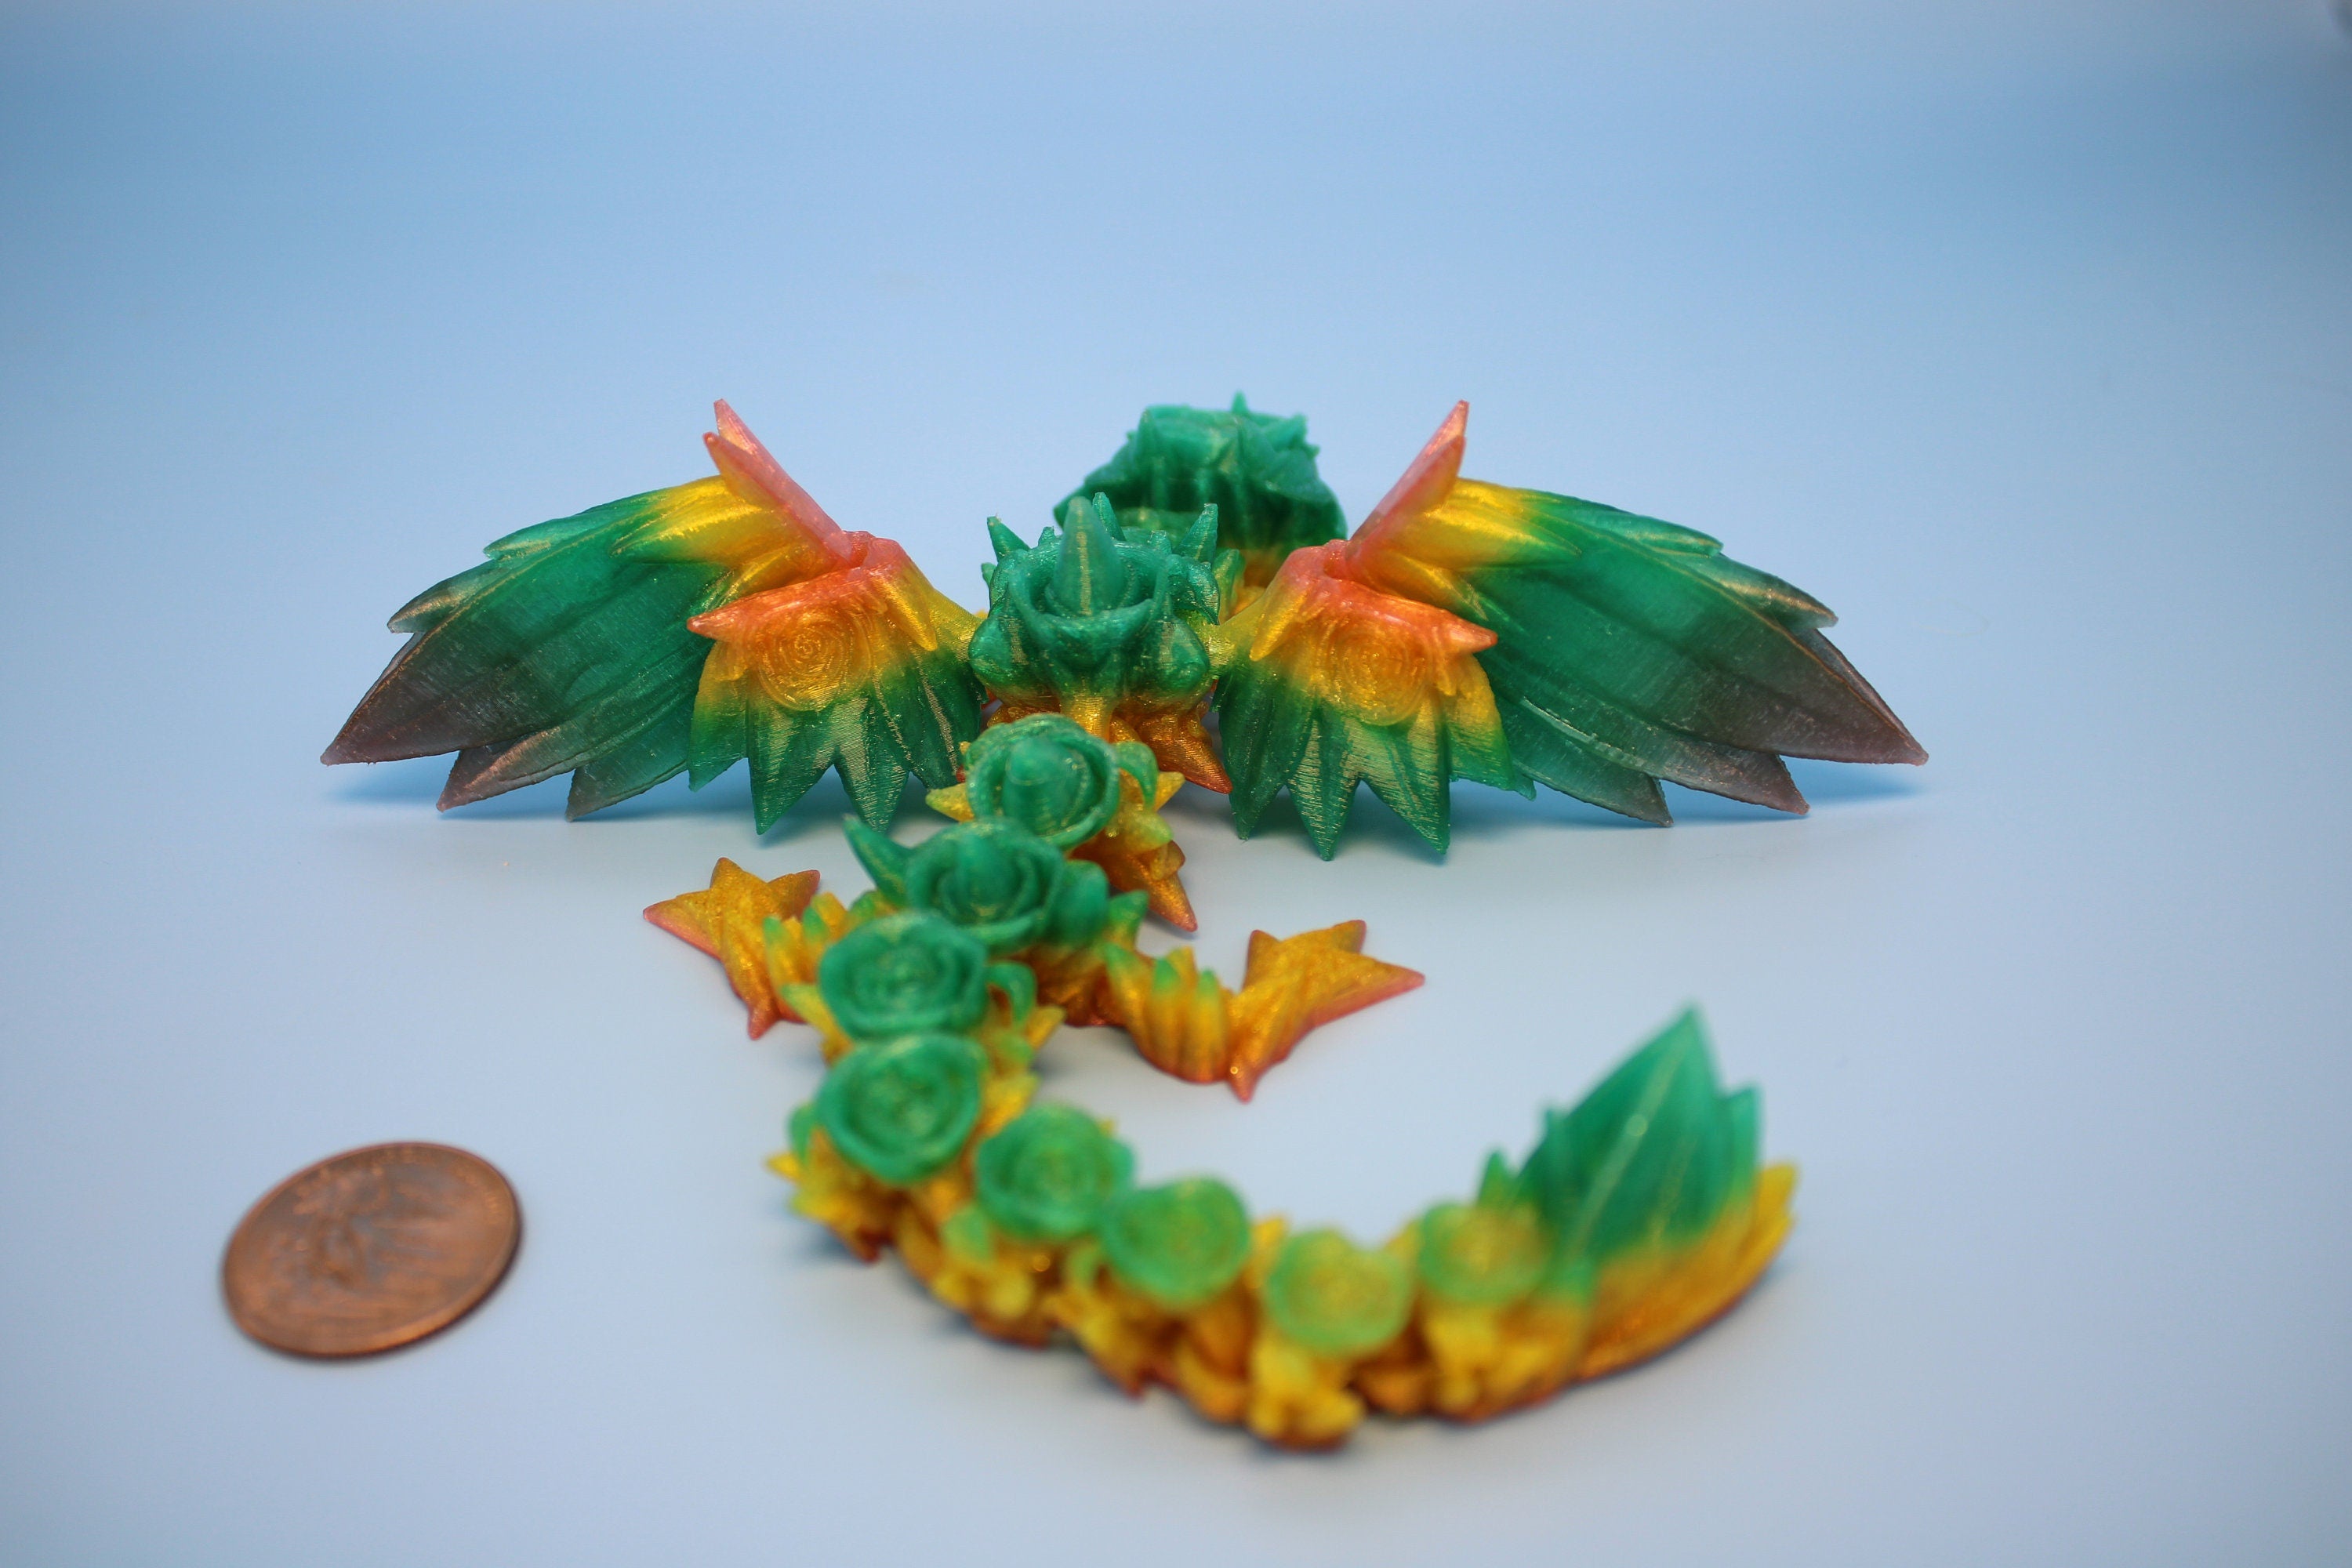 Baby Rose Wing Dragon | Rainbow | 3D Printed TPU | Fidget | Flexi Toy 8.5 in. | Stress Relief Gift